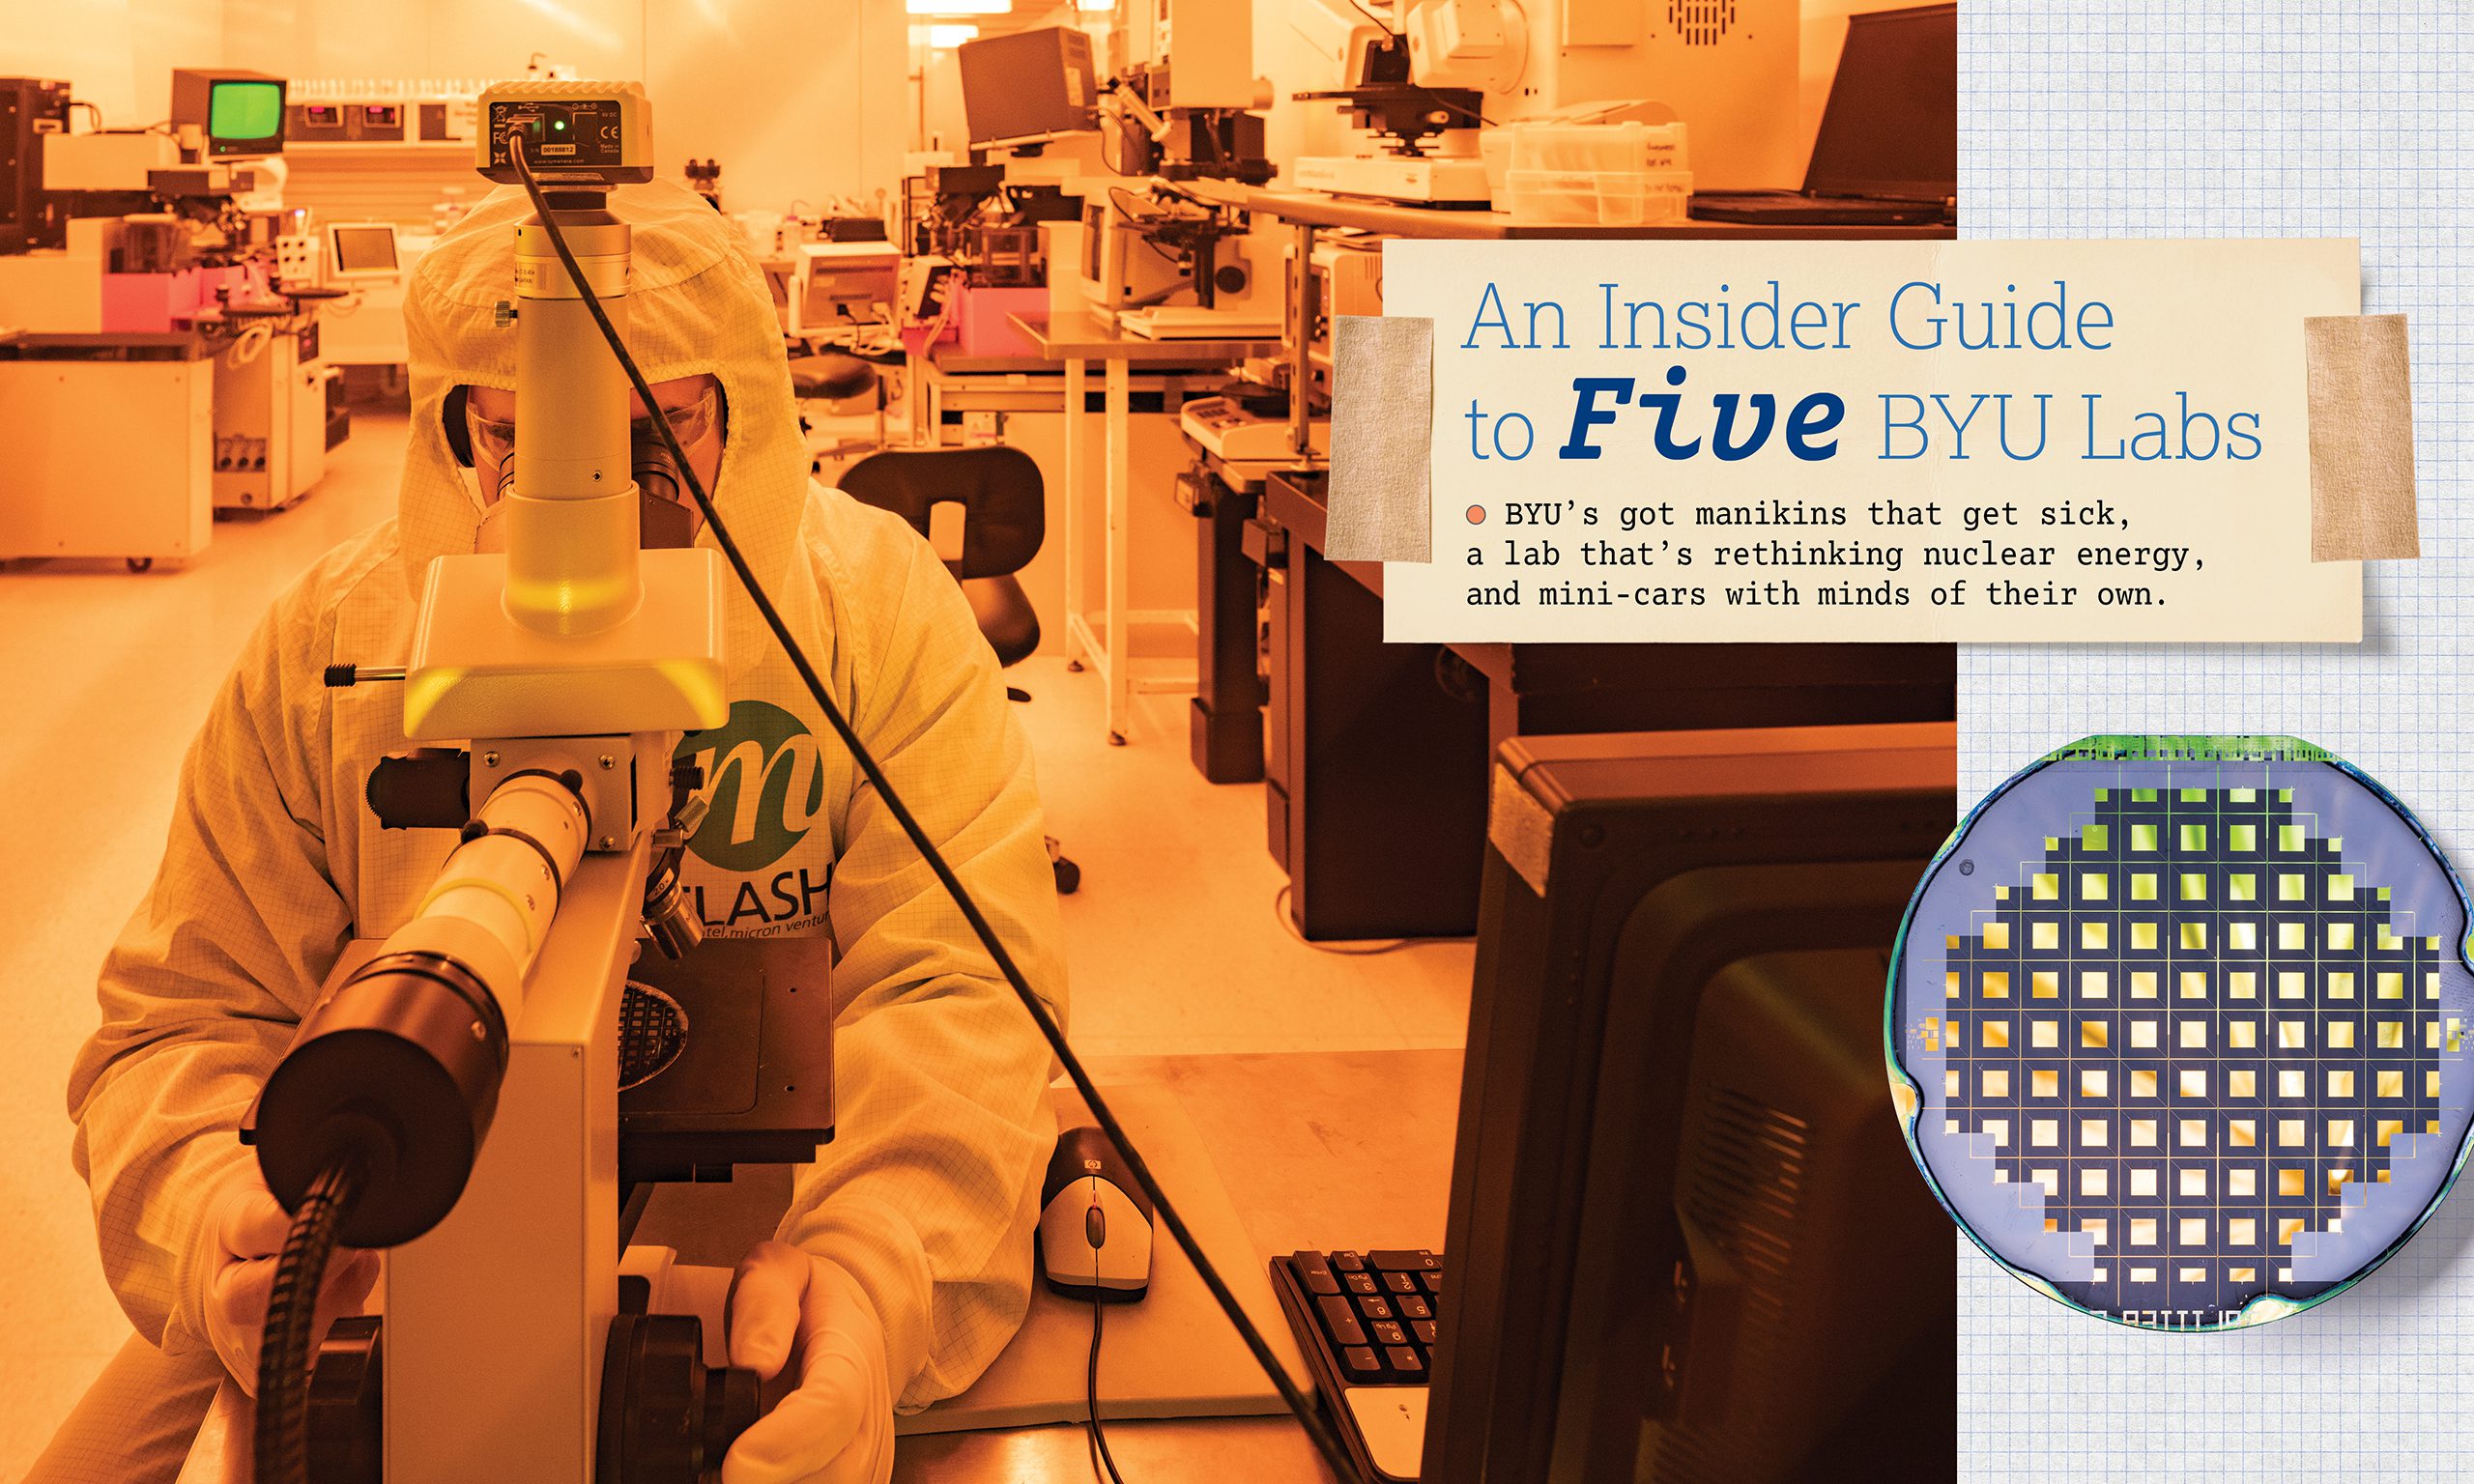 The opening spread of a BYU Magazine article titled "An Insider Guide to Five BYU Labs." A subtitle reads, "BYU’s got manikins that get sick, a lab that’s rethinking nuclear energy, and mini-cars with minds of their own." The image is of the BYU clean room in orange lighting and with a student in a white protective suit in the foreground looking in a microscope. A picture of microfluidic chip made in the lab is at the right side.